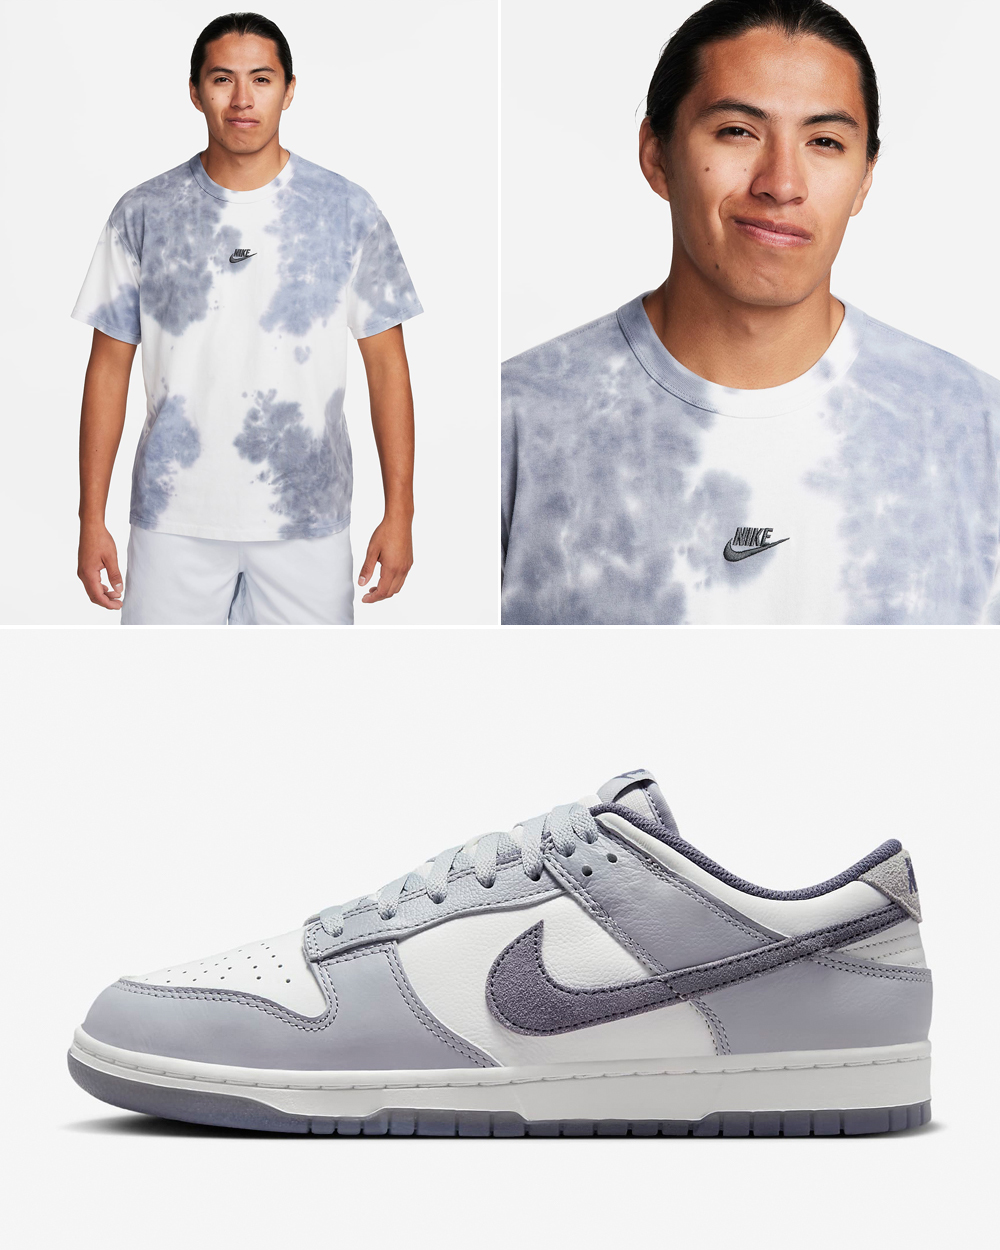 _Nike-Dunk-Low-Light-Carbon-Shirt-Outfit